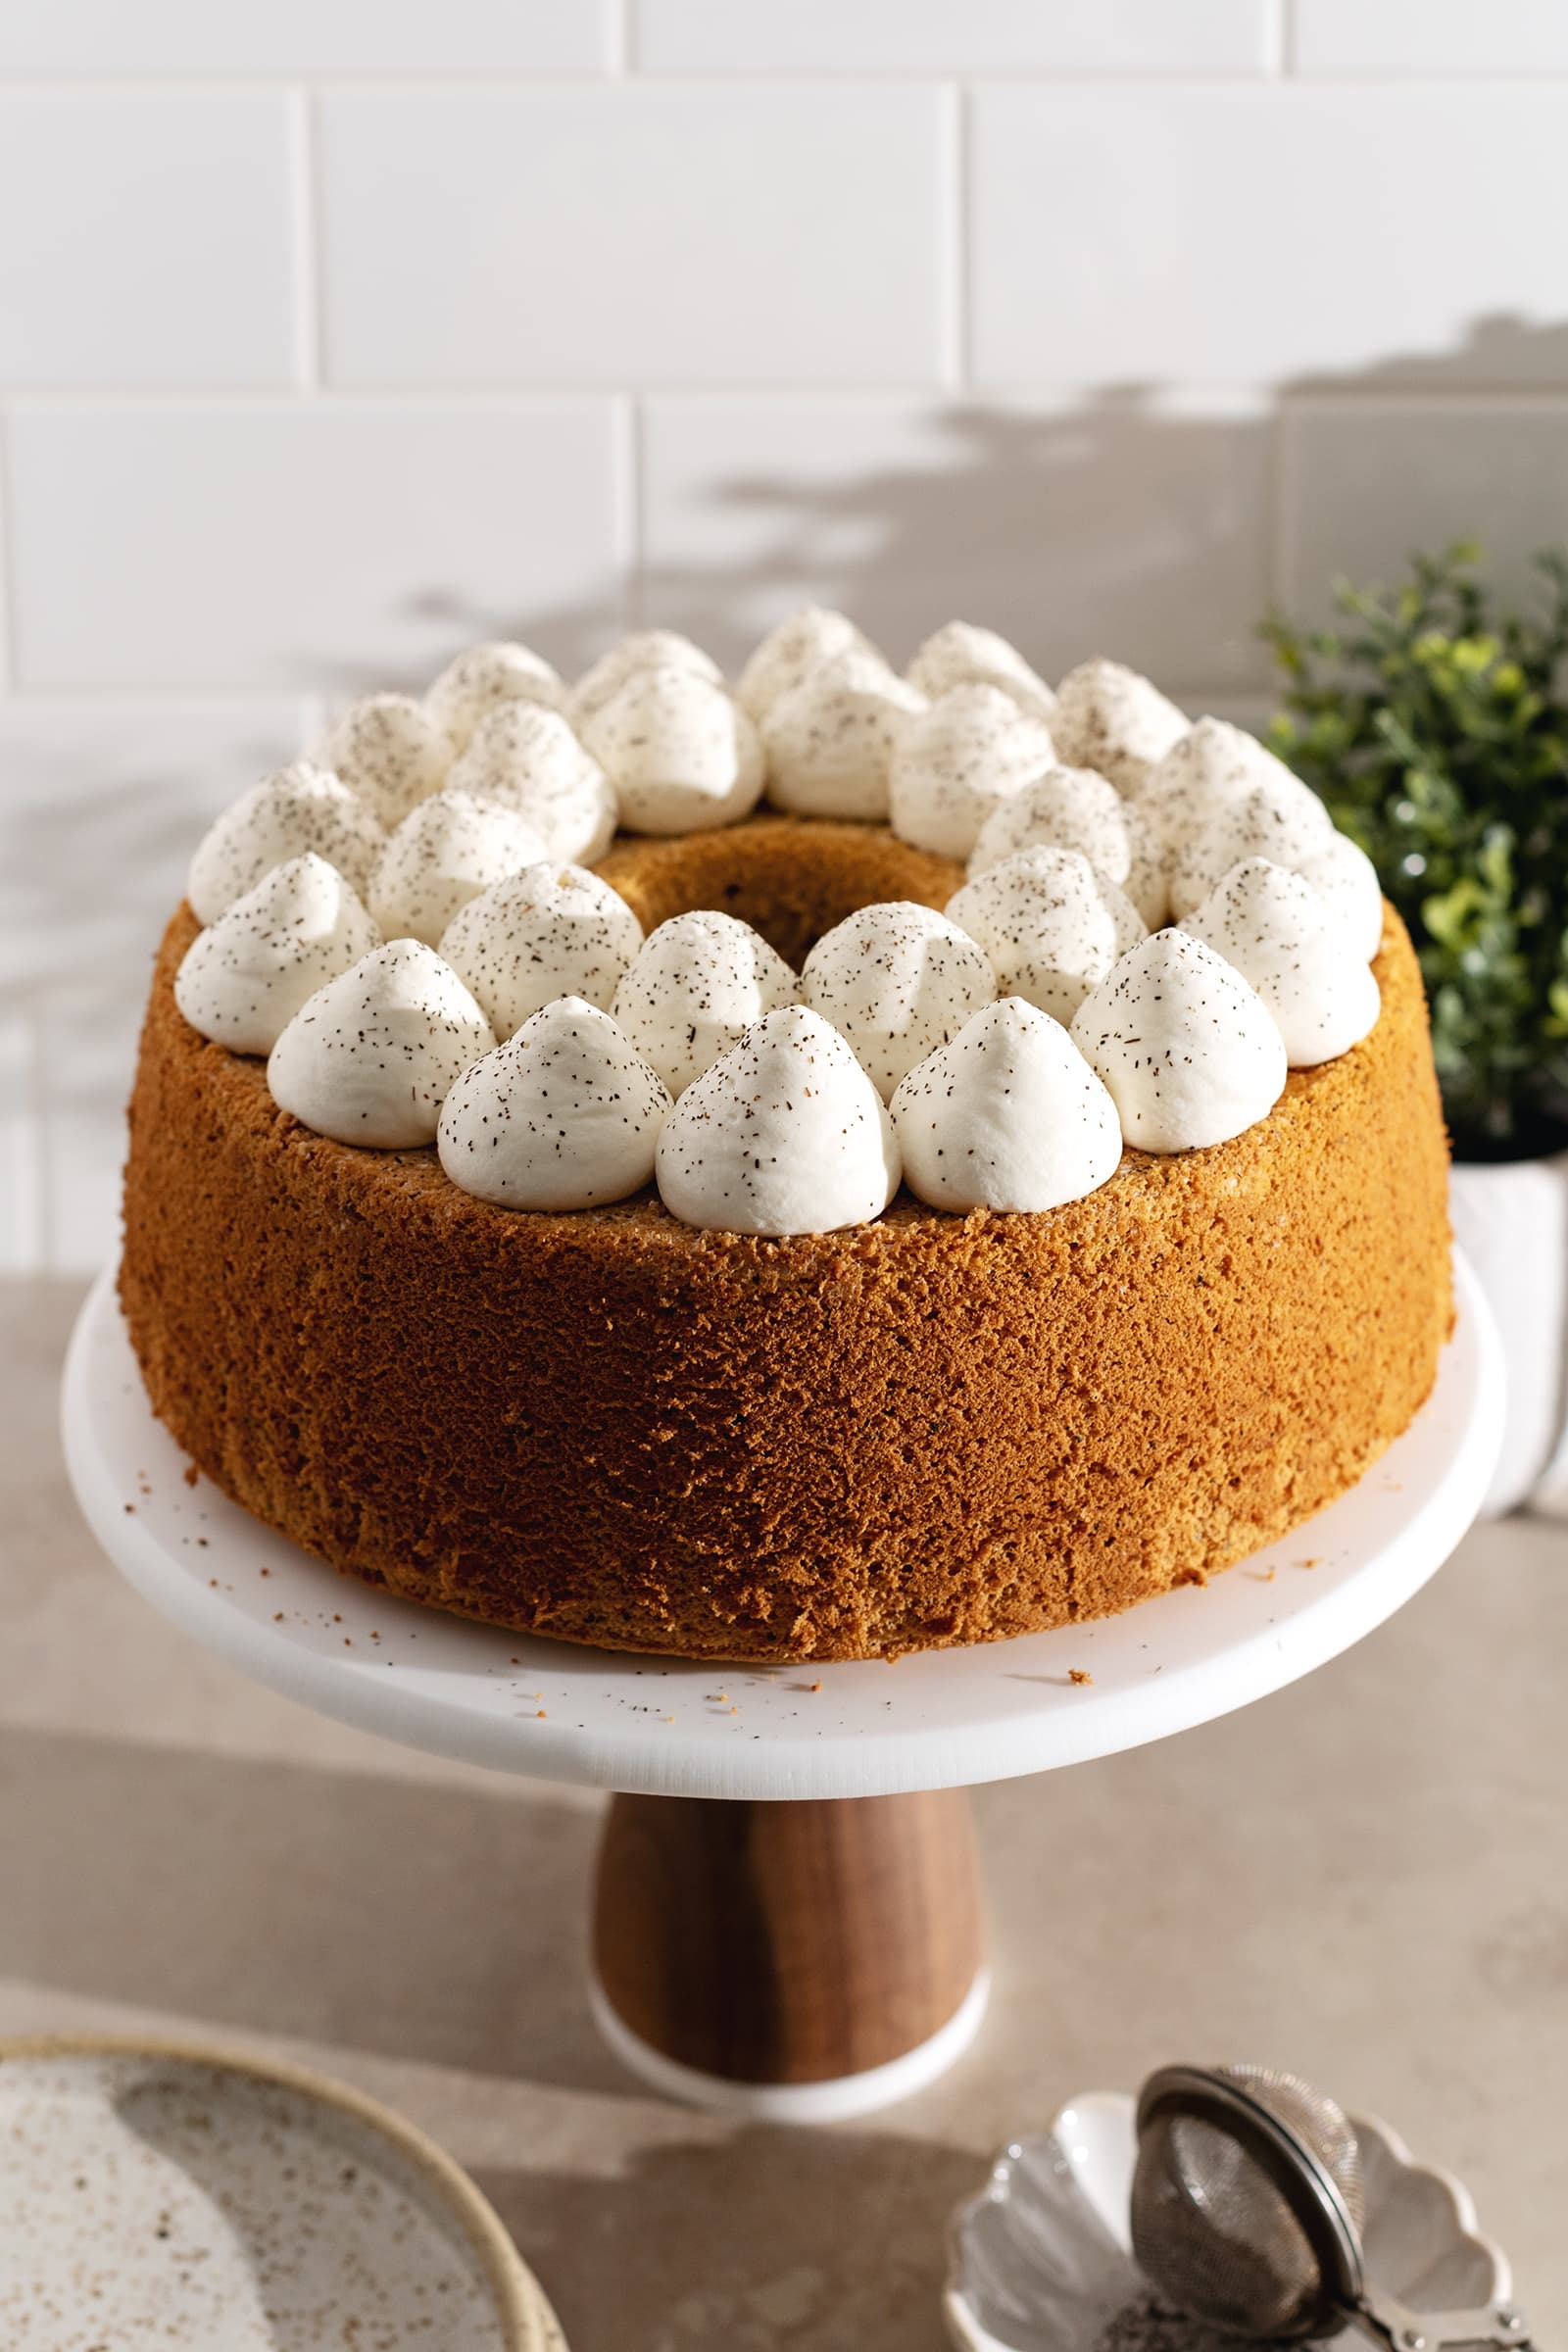 A chiffon cake topped with dollops of whipped cream on a cake stand.